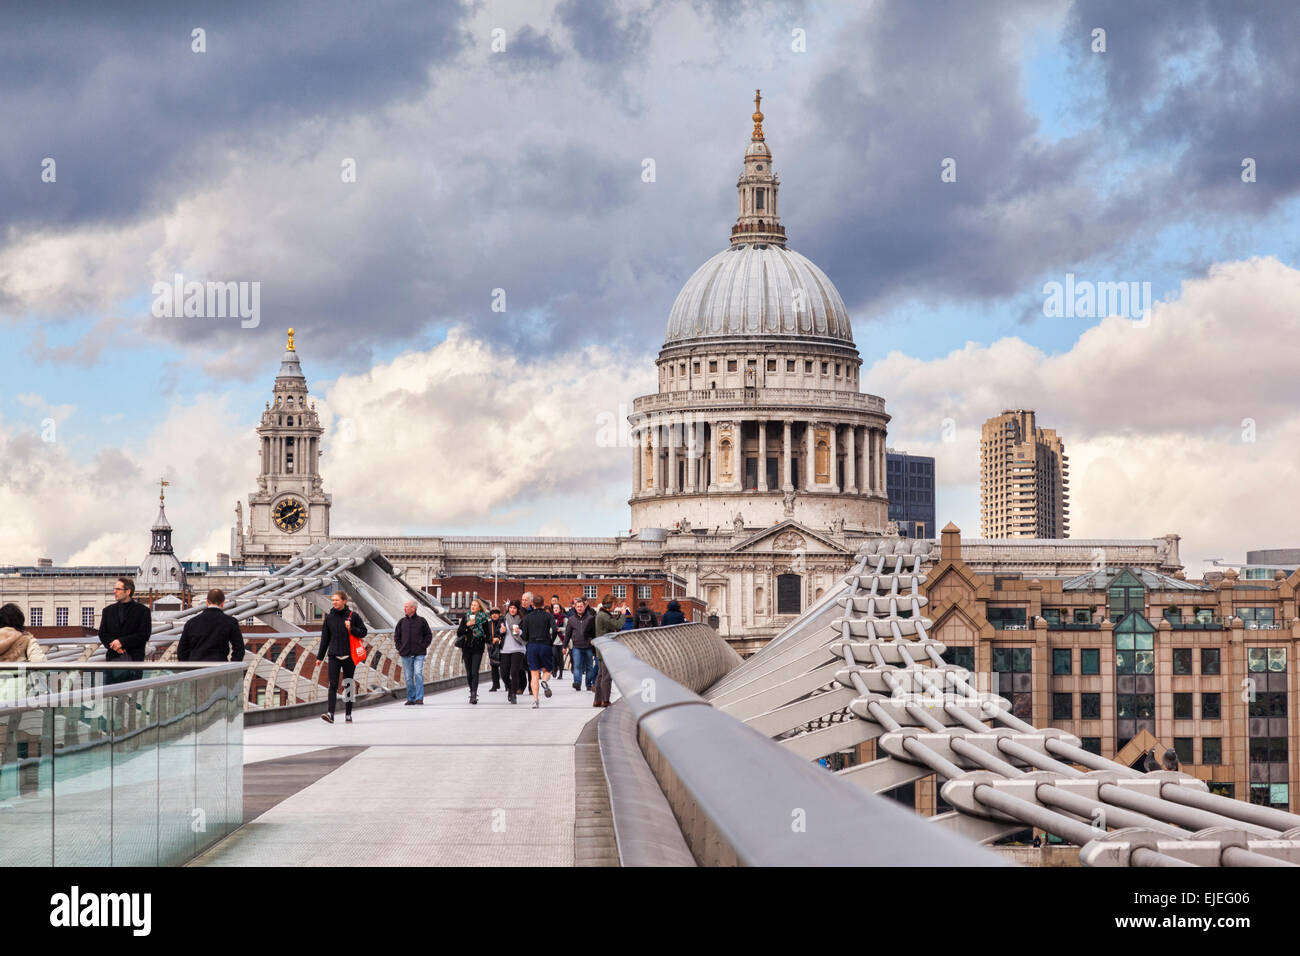 St Paul's Cathedral from the Millennium Bridge, London, England, under a dramatic sky. Stock Photo